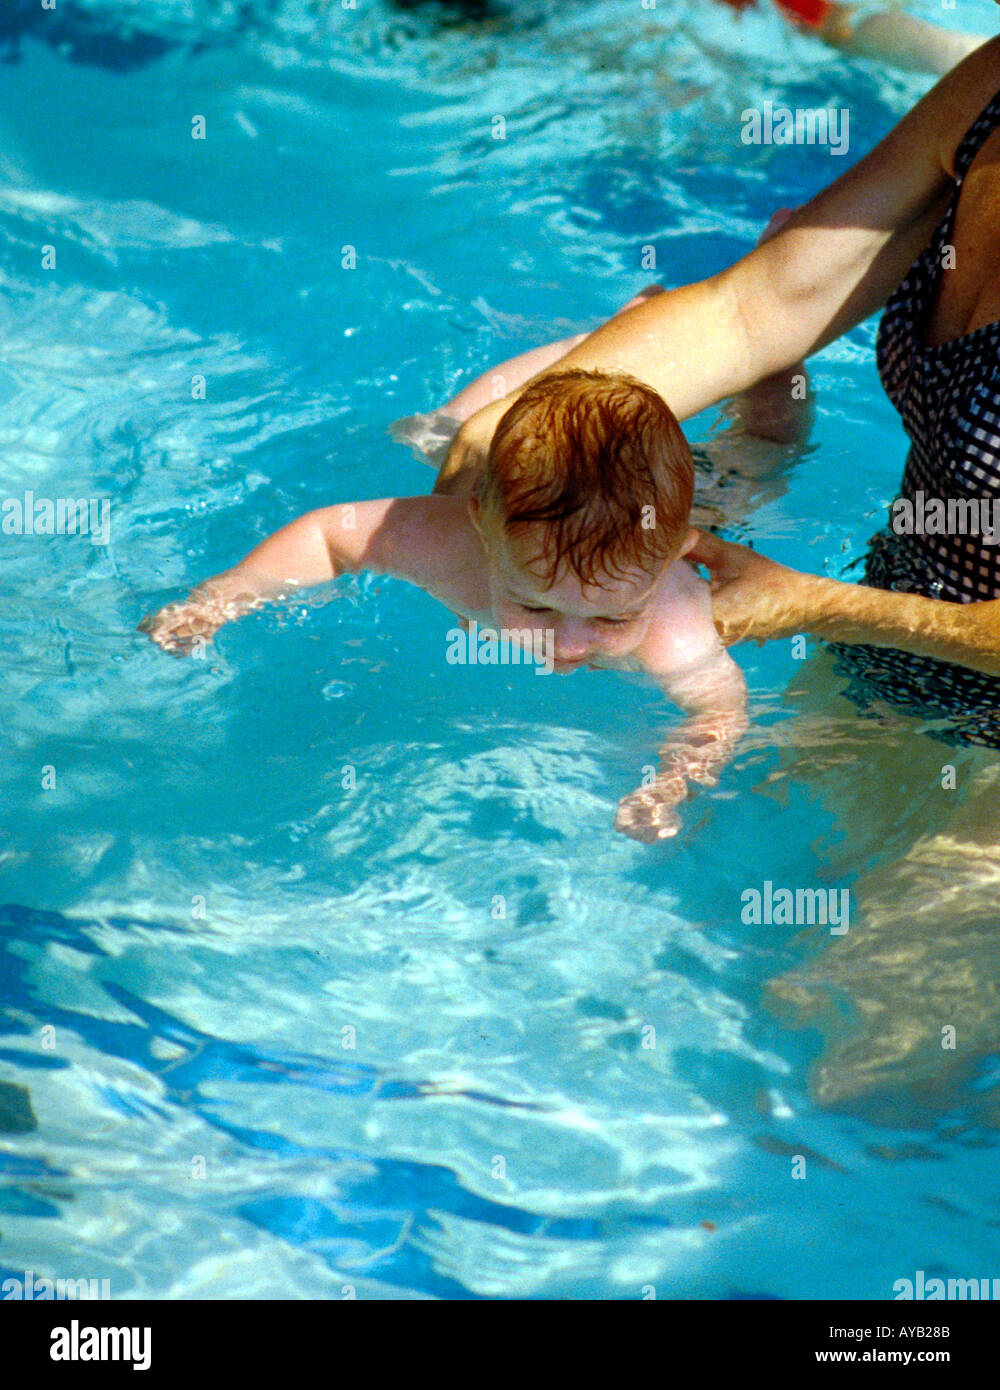 Young baby experiences the  feeling of water and learning to swim. Stock Photo